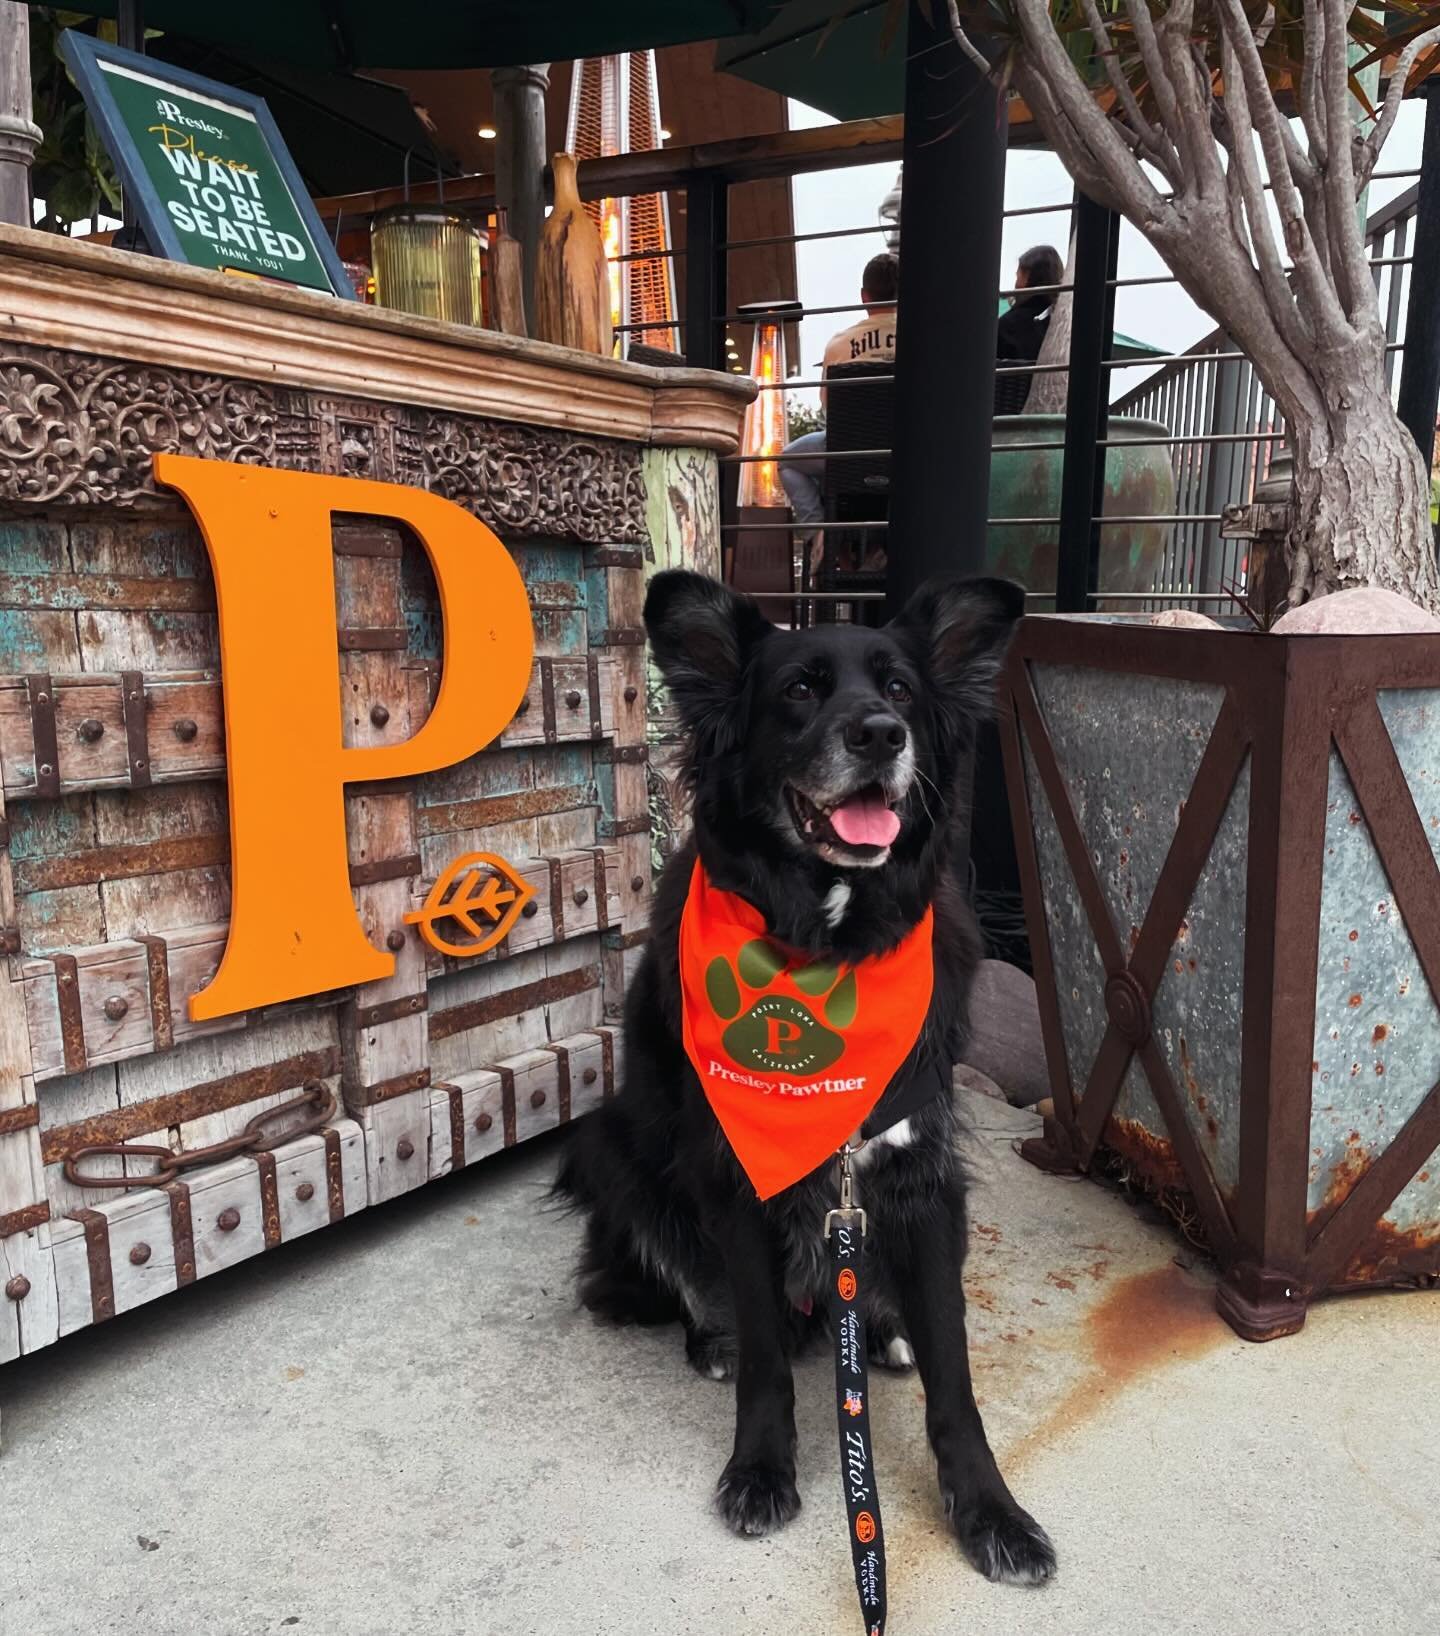 Attention Presley Pups! Our Presley Pawtner bandanas are fully stocked! Enjoy 10% off your entire bill every time you bring your pup in wearing theirs! Ask your server or bartender about purchasing one this weekend, and don&rsquo;t forget to check ou